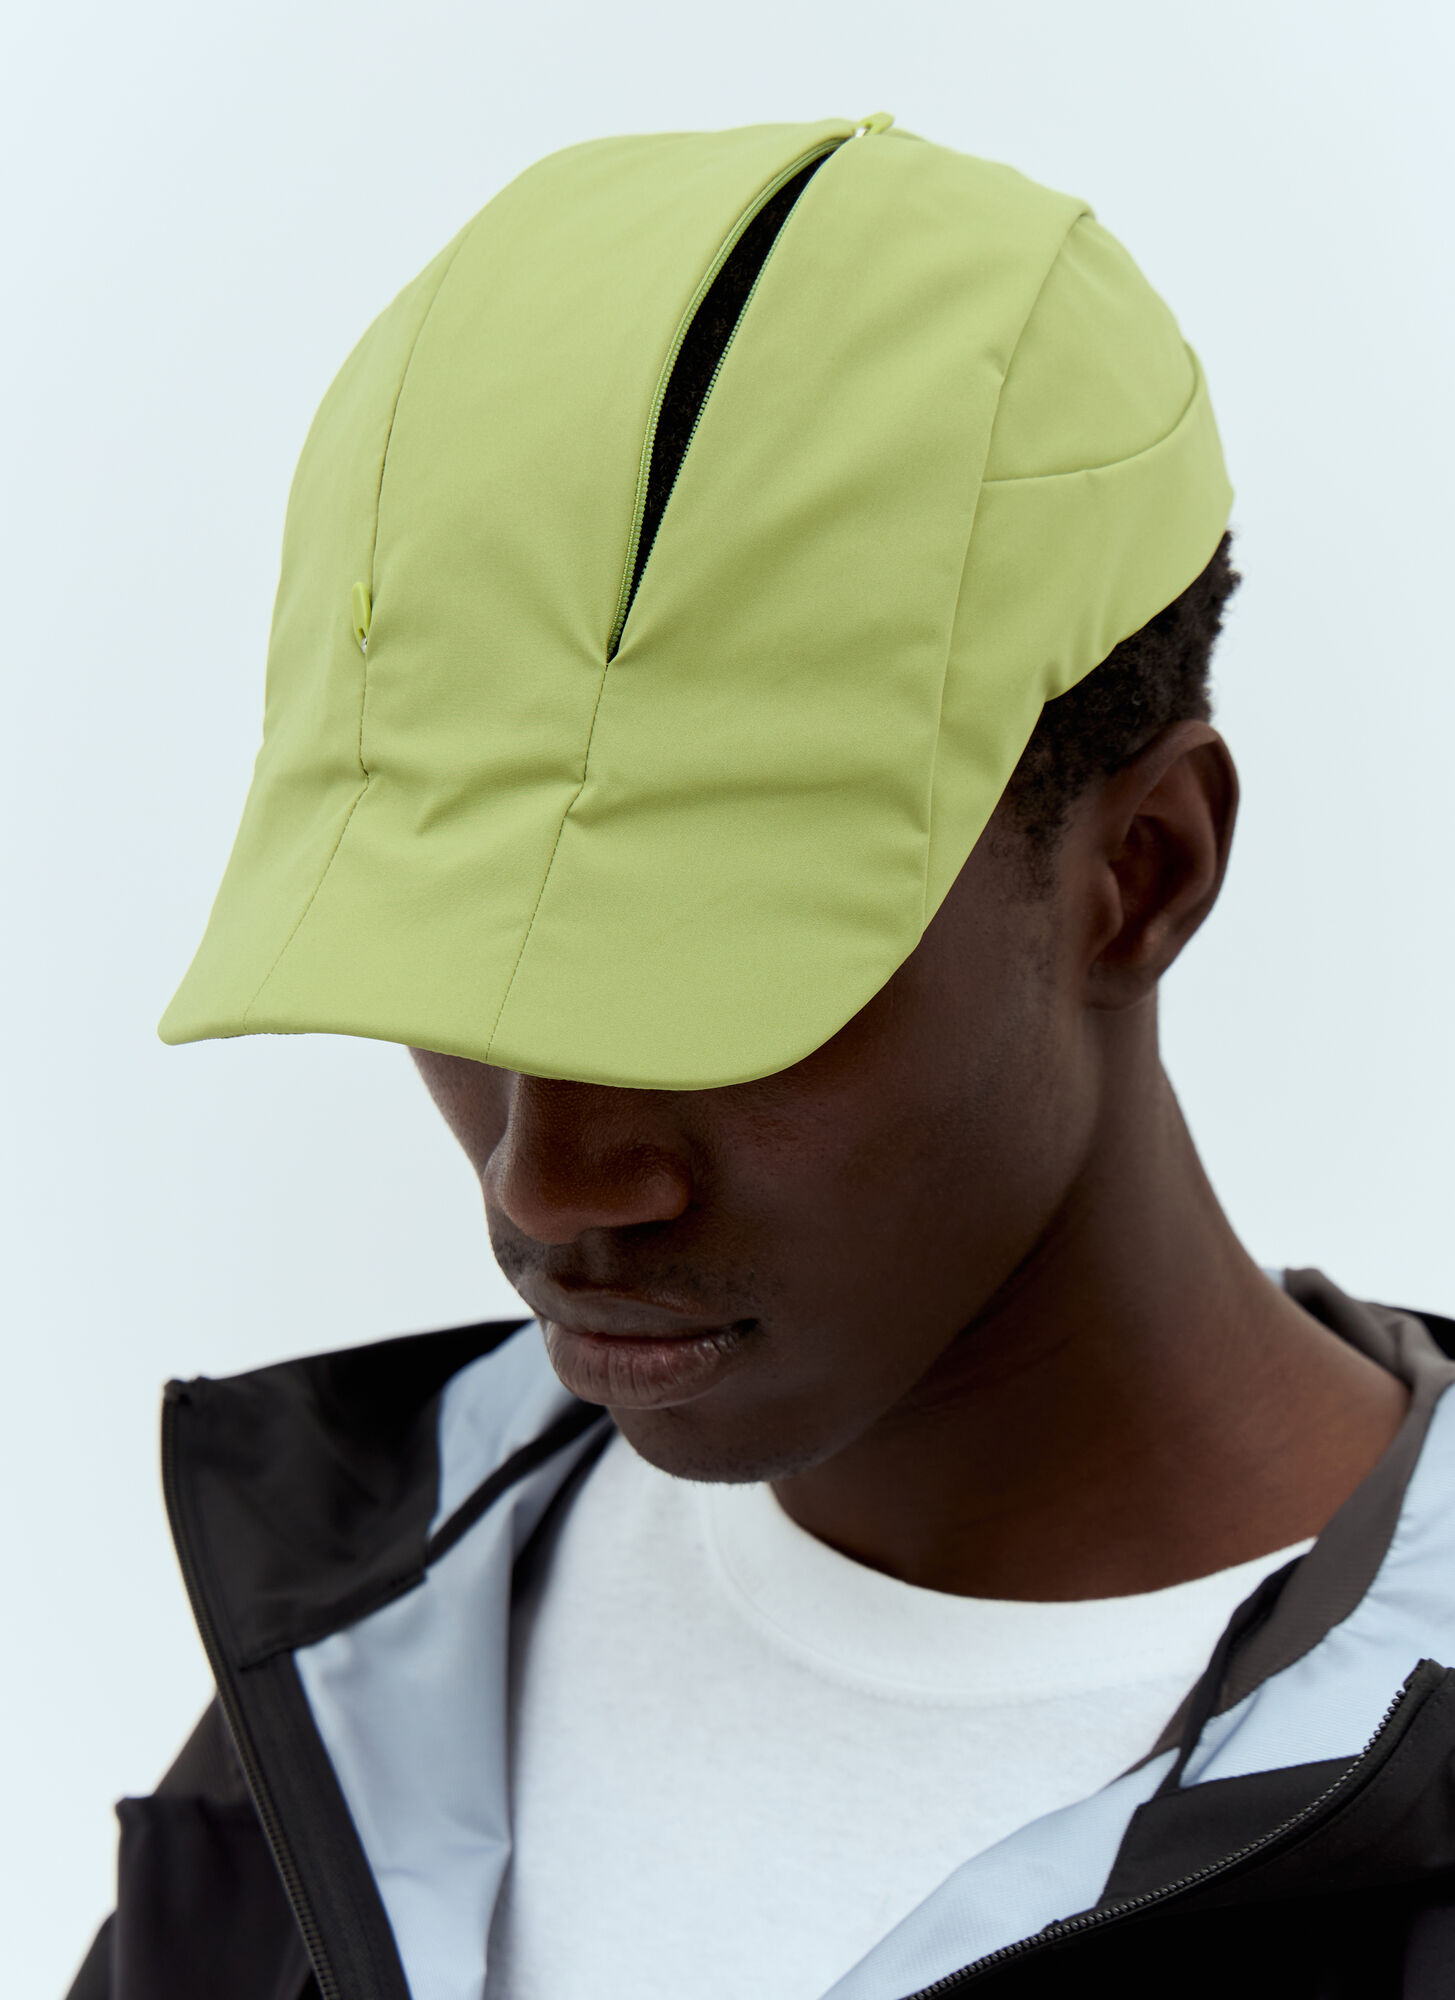 Post Archive Faction (paf) 6.0 Baseball Cap Center In Green